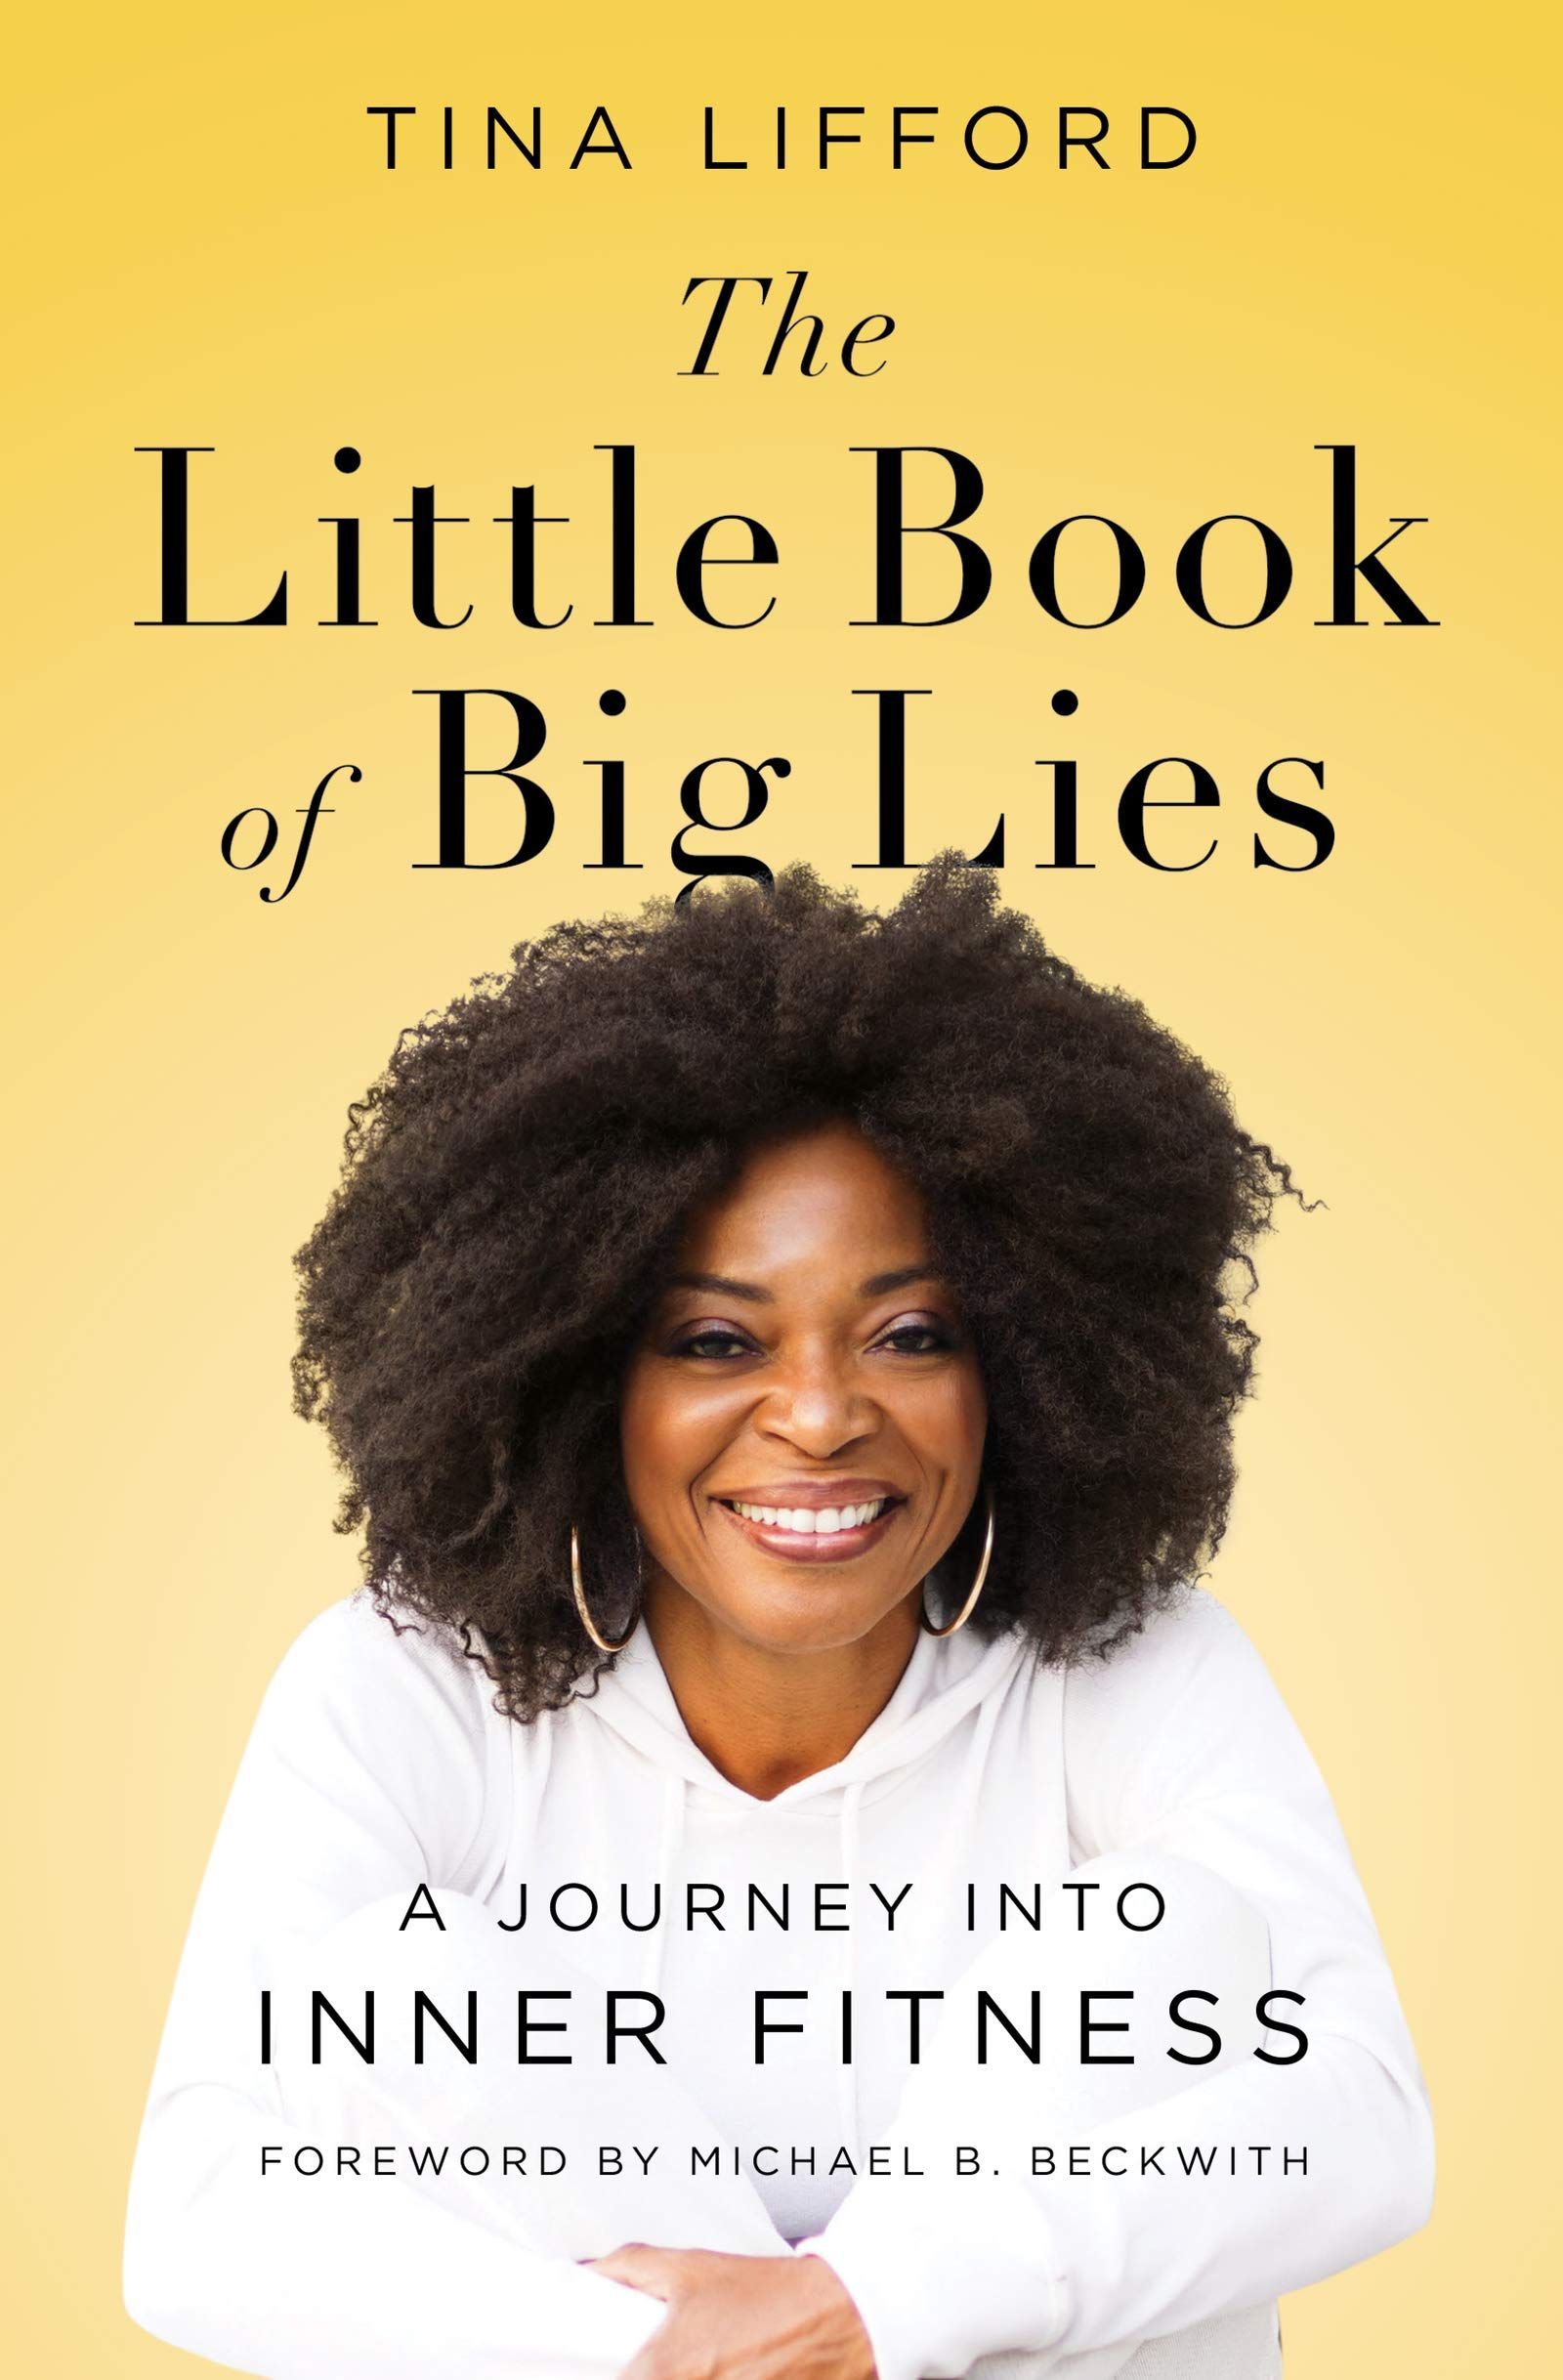 'The Little Book of Big Lies' by Tina Lifford